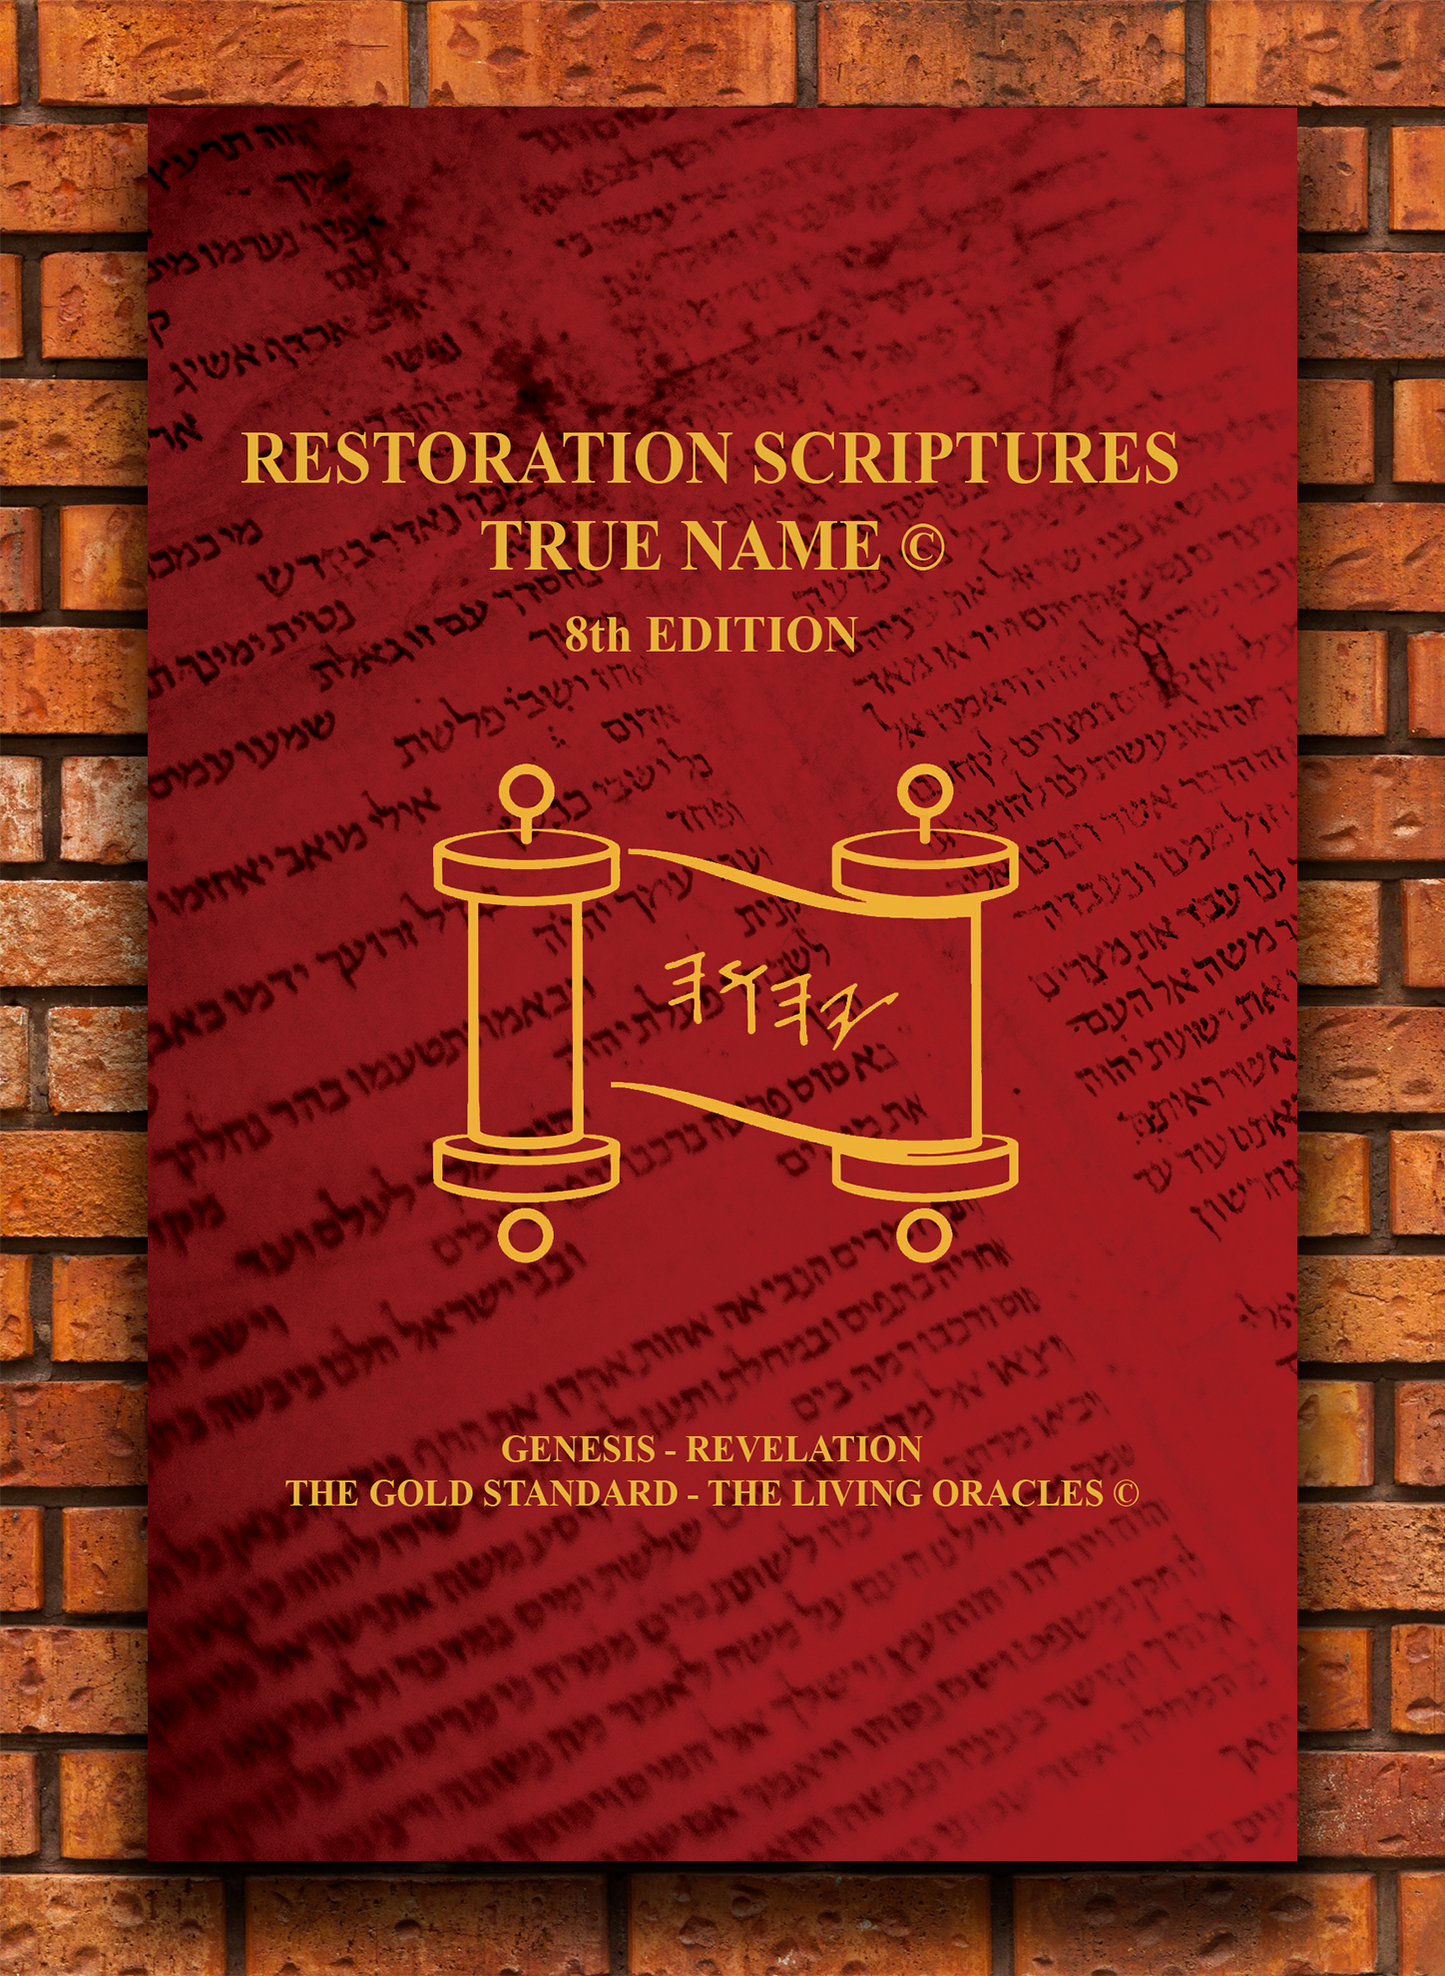 The Restoration Scriptures True Name Eighth Edition - Genesis-Revelation Softcover